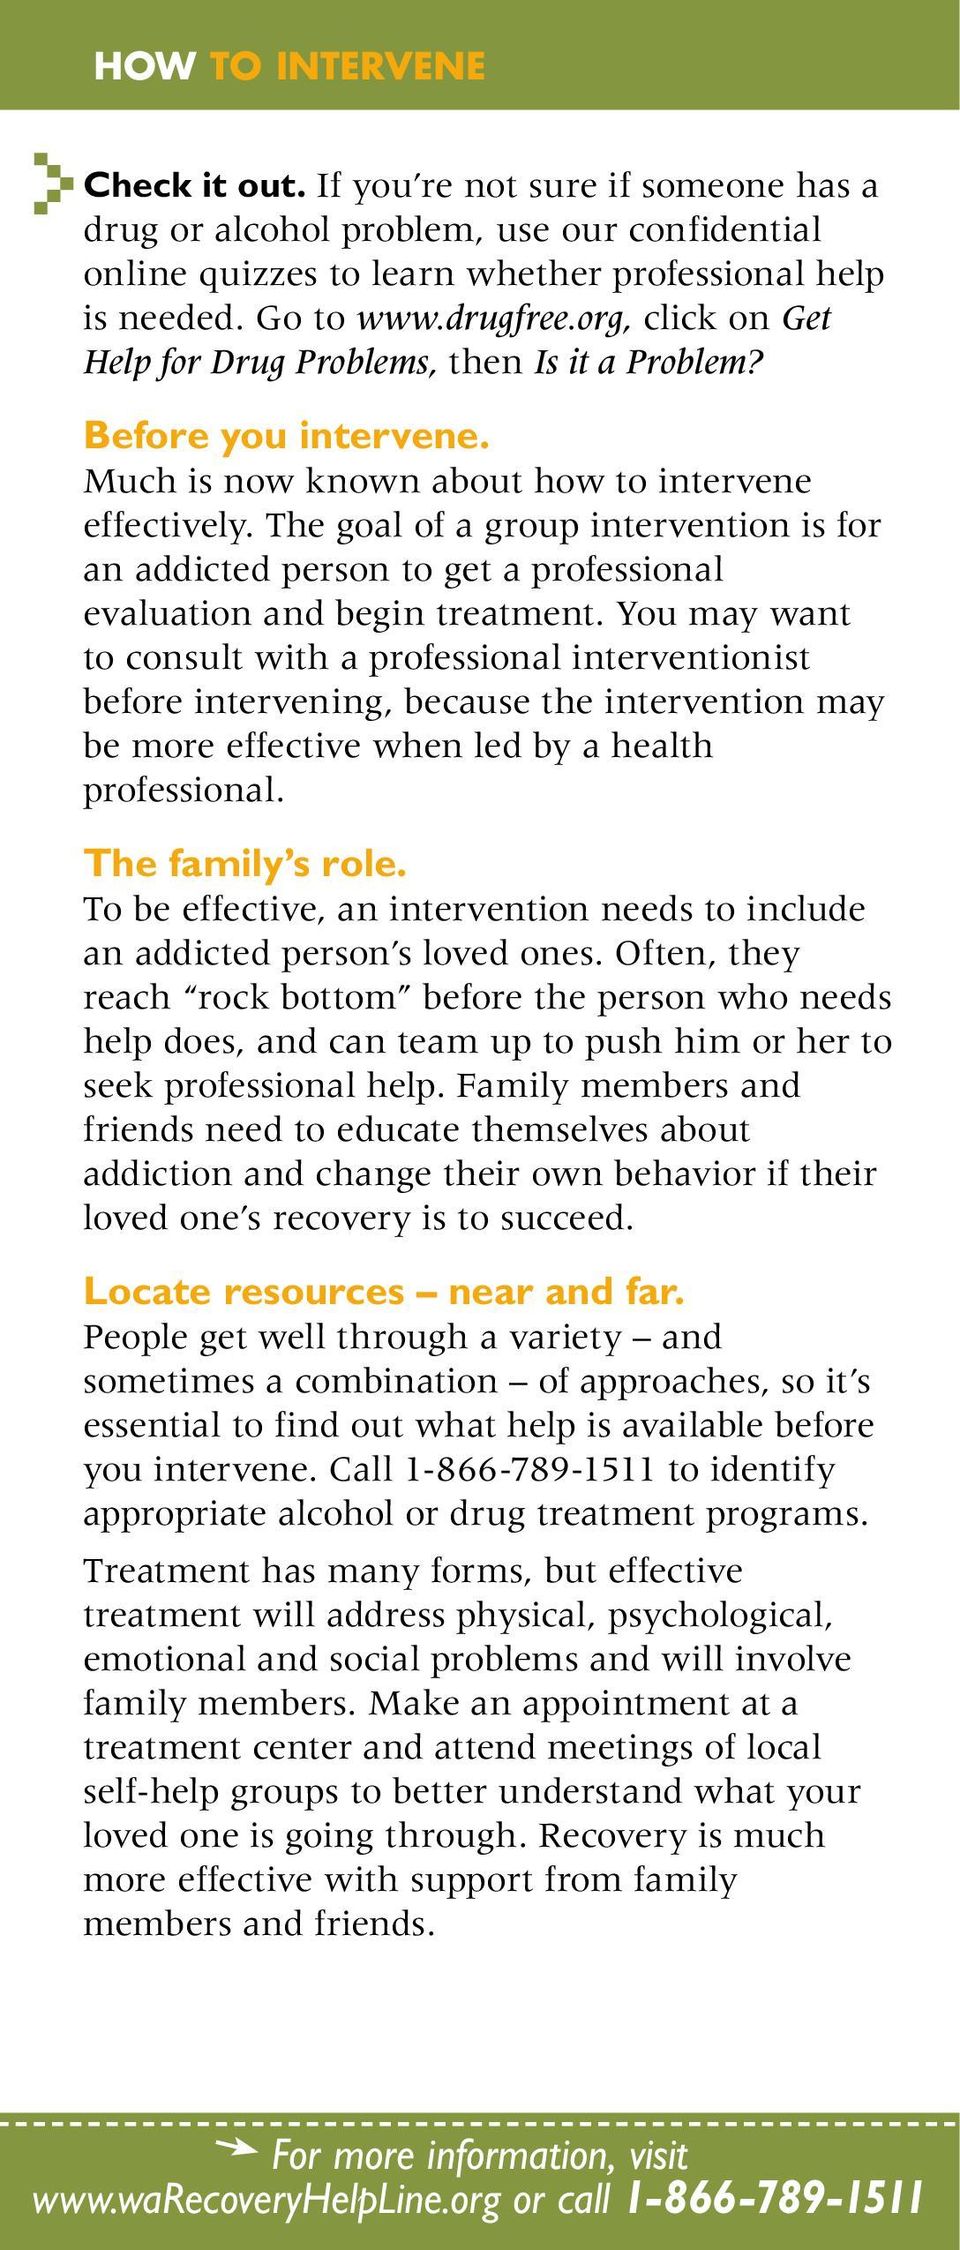 The goal of a group intervention is for an addicted person to get a professional evaluation and begin treatment.